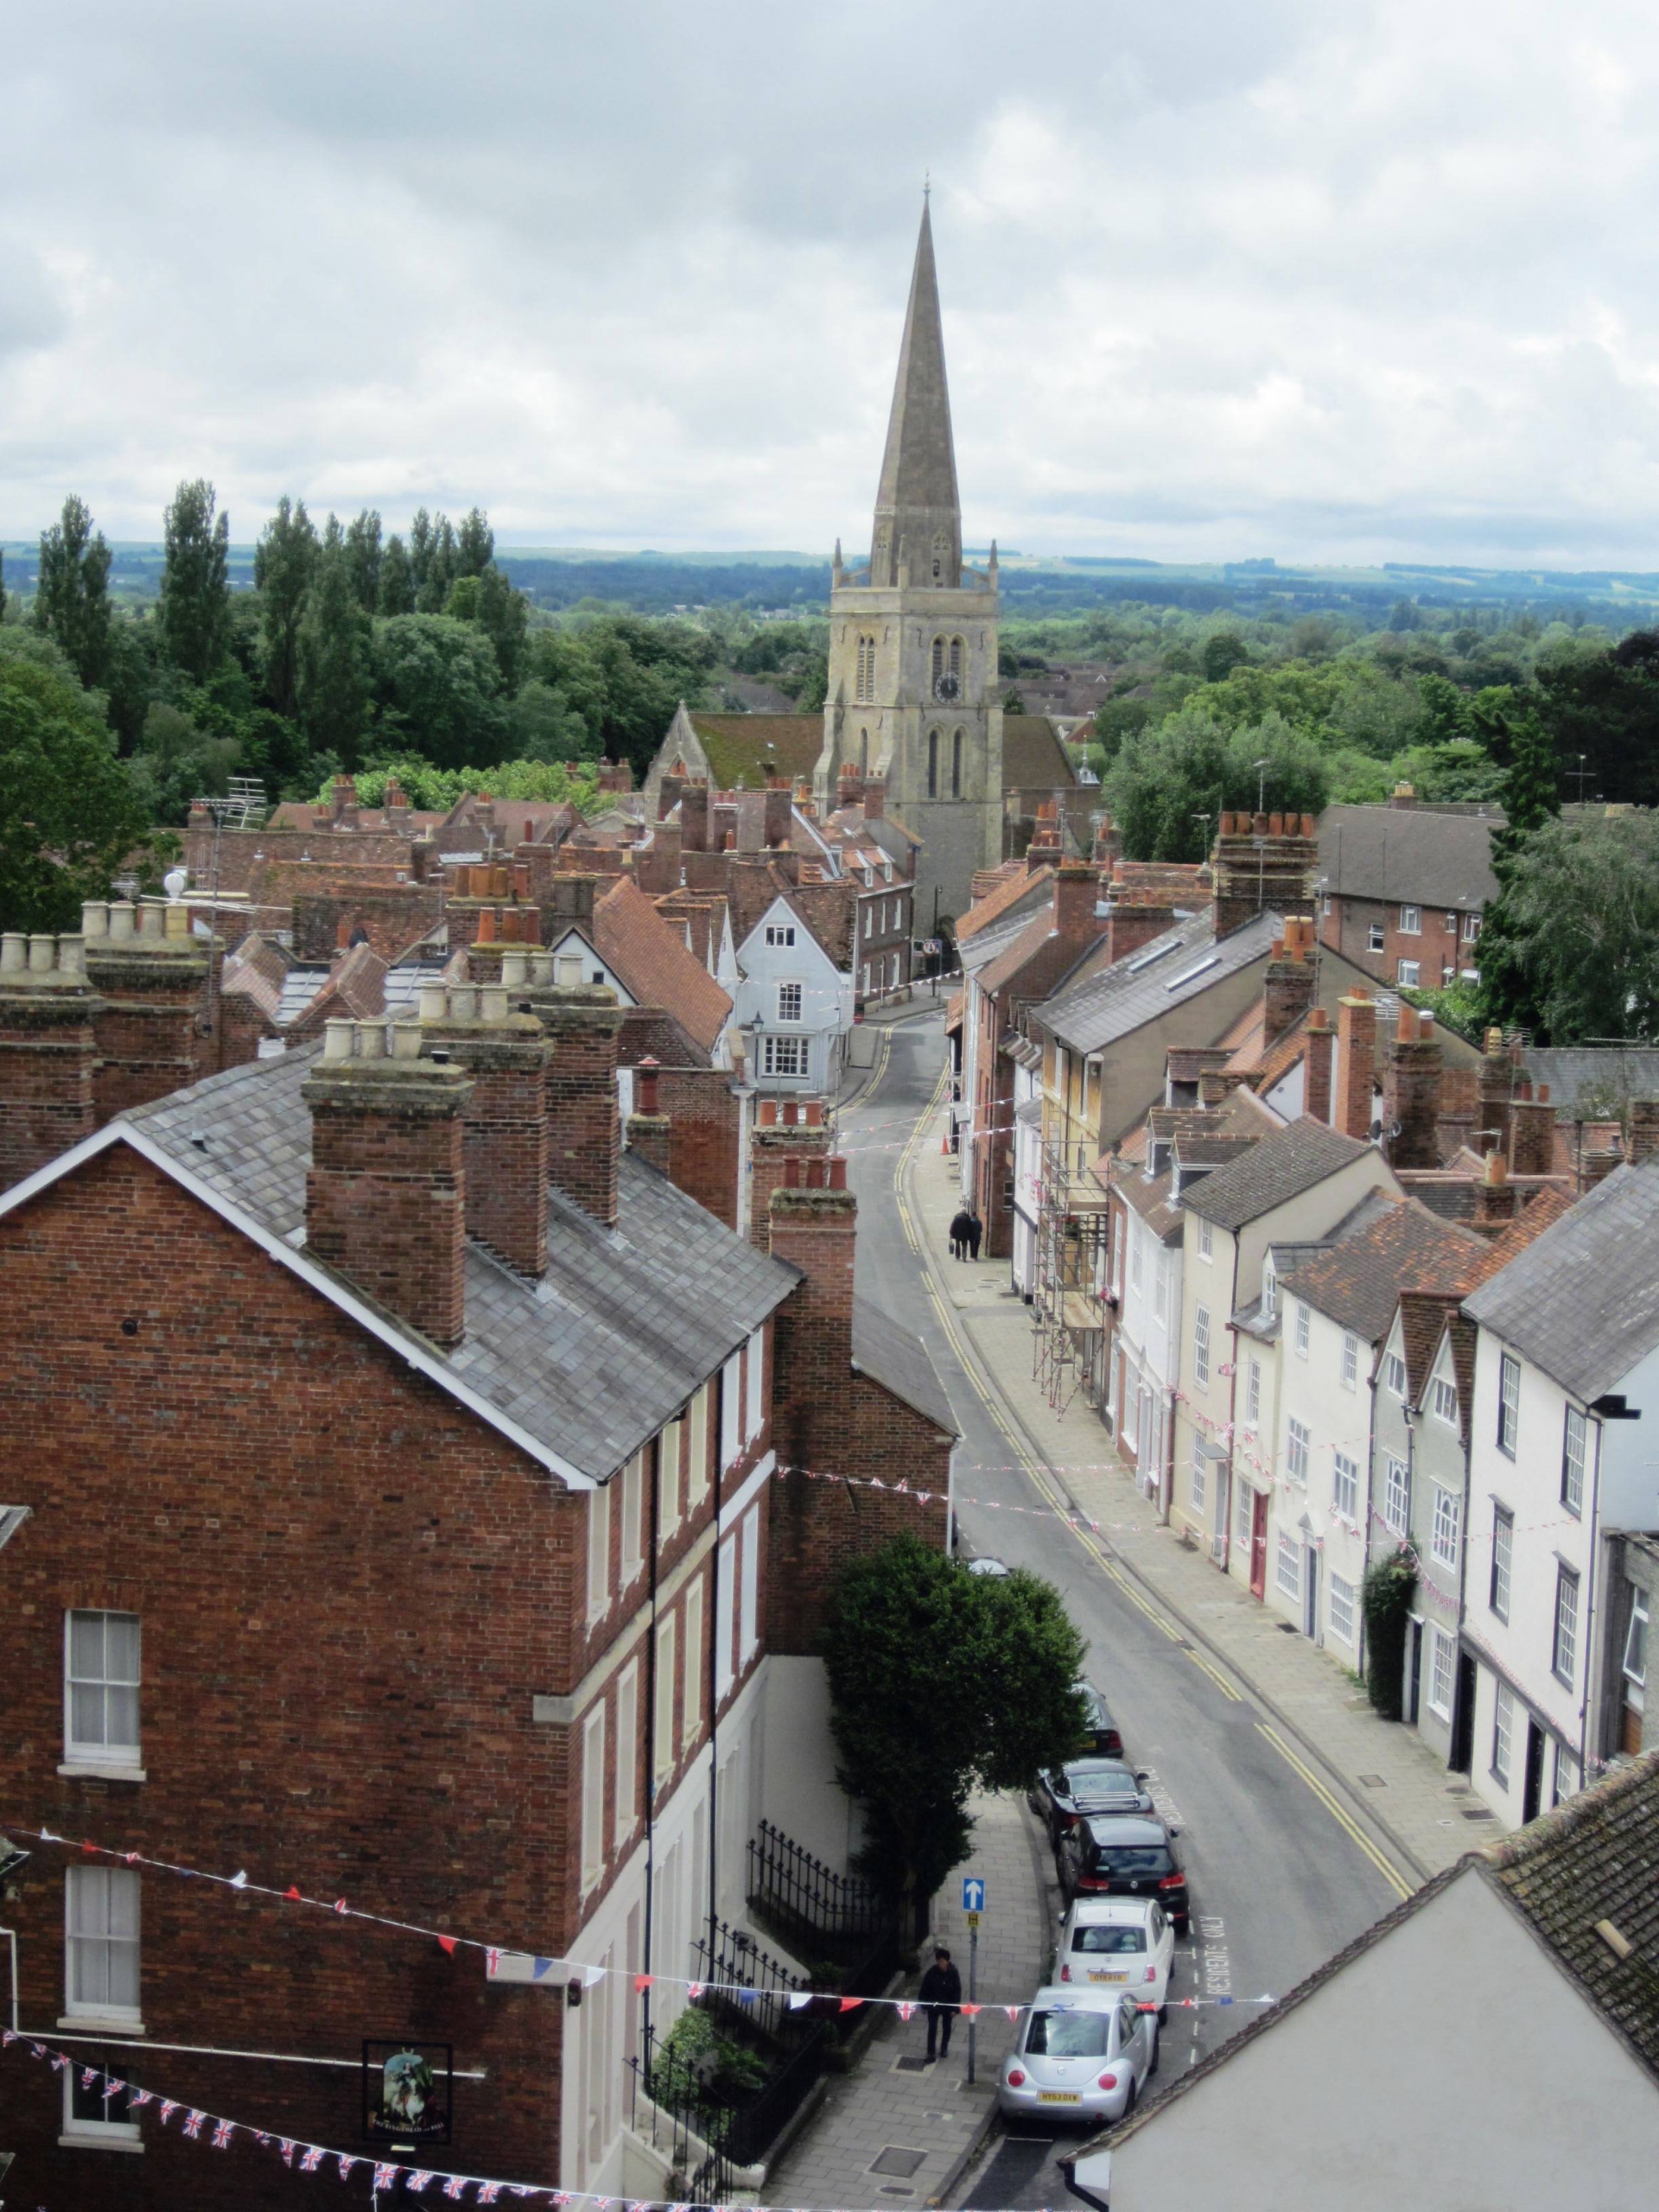 East St Helen Street in 2012 from The County Hall roof